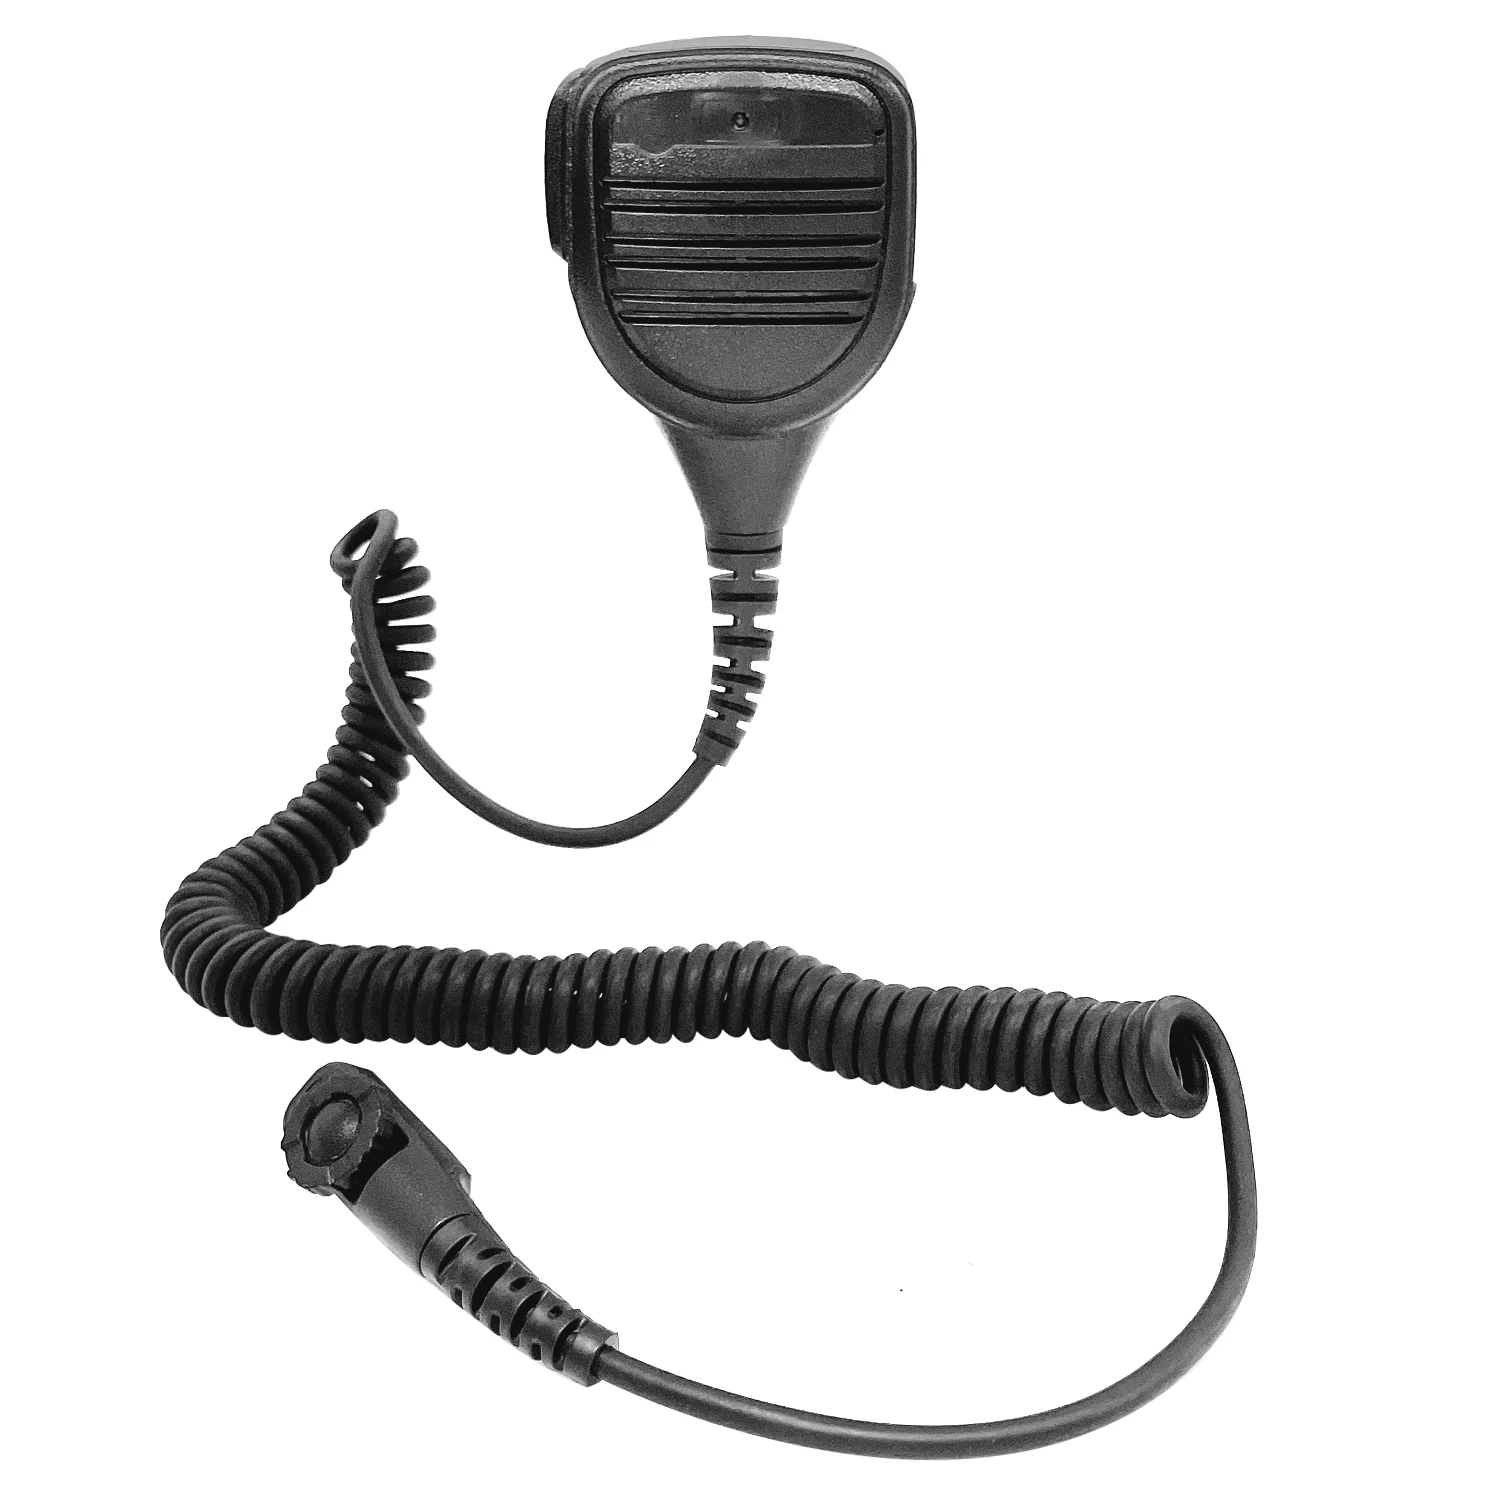 Remote Waterproof Speaker Microphone Mic PTT for Hytera PD580, PD700, PD700G, PD702, PD702G Walkie Talkie Two Way Radio